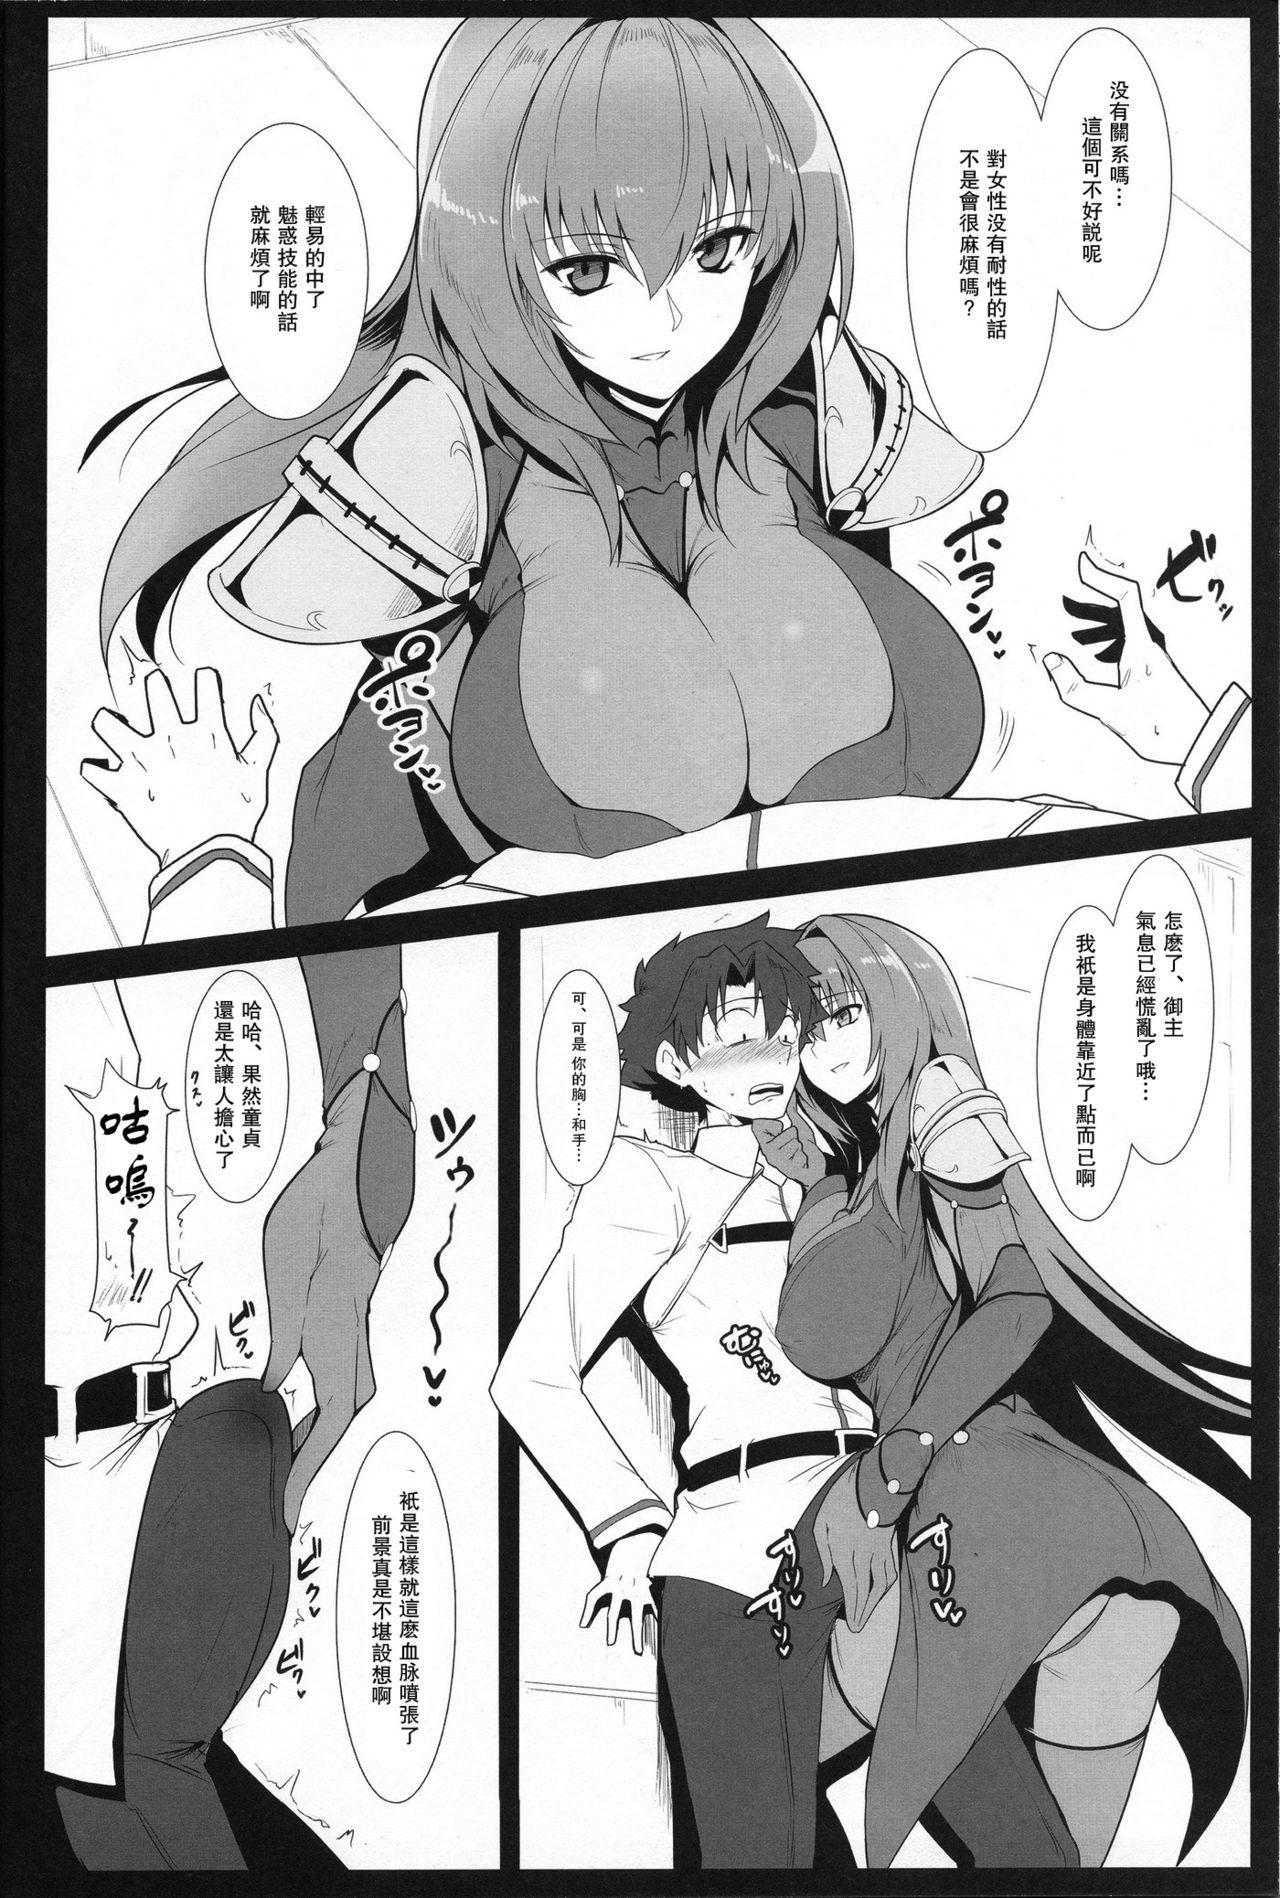 Dykes AH! MY MISTRESS! - Fate grand order Boobs - Page 5